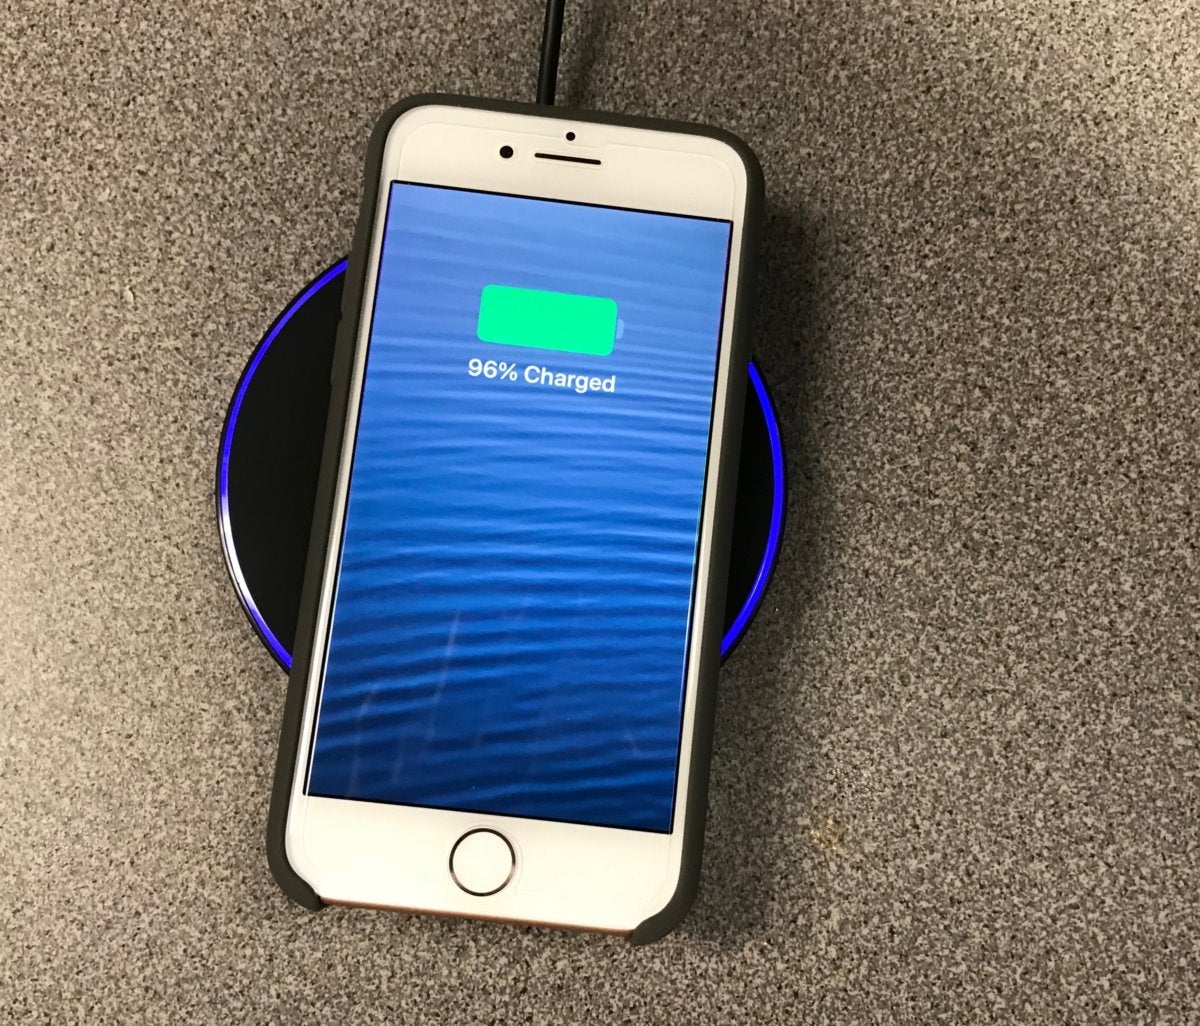 Apple iPhone's Qi-based wireless charging is slower than rivals